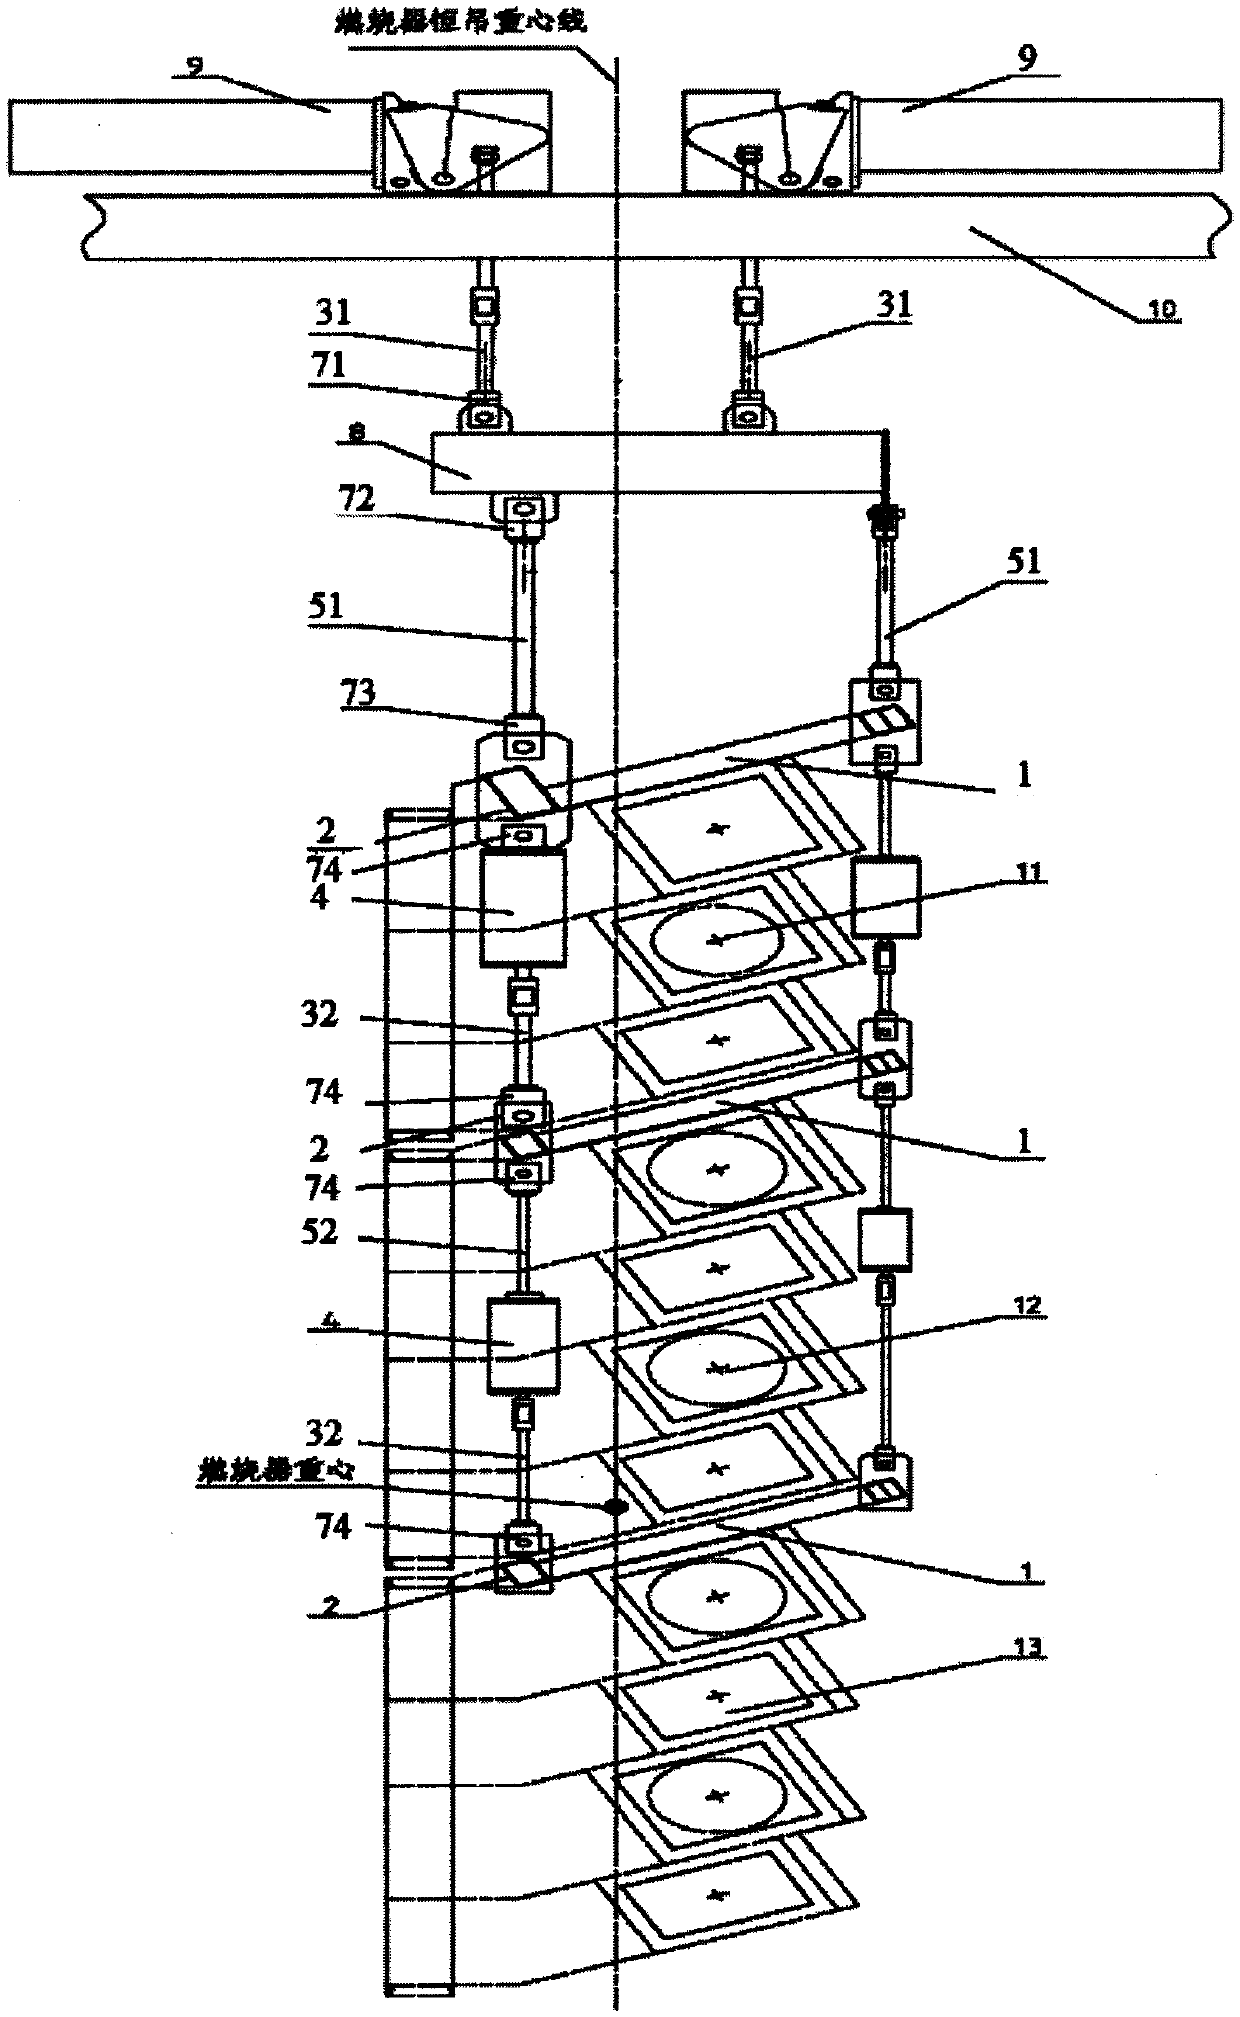 A device for balancing and suspending a burner with a double constant force spring hanger